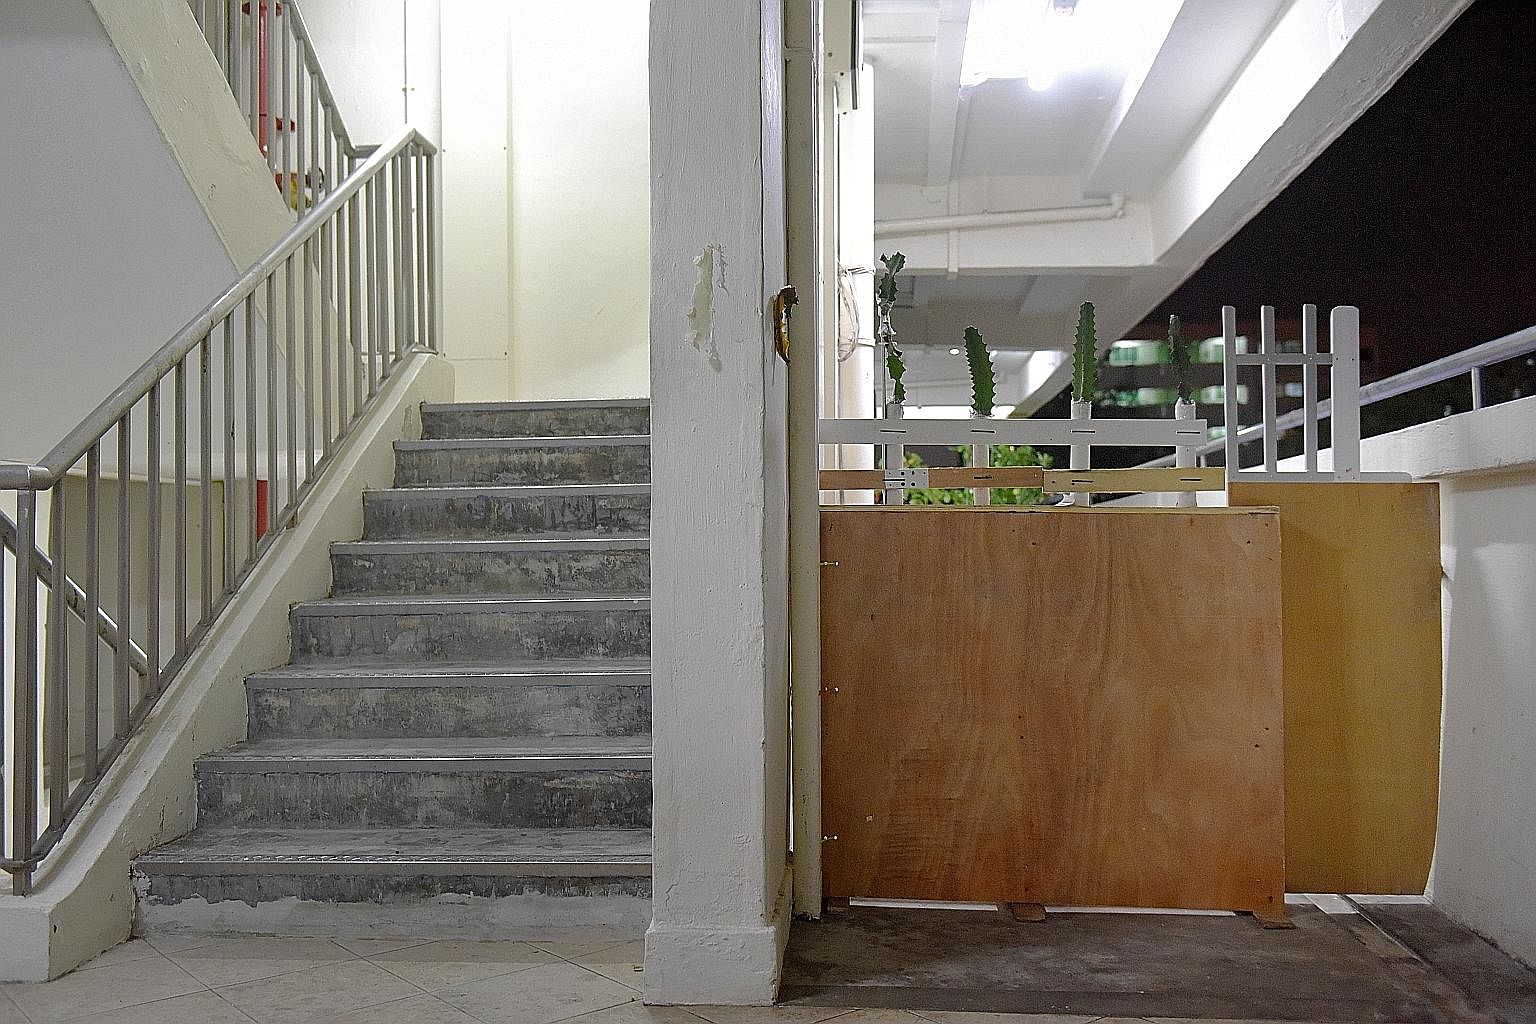 Residents at this Yishun flat have built a wall barbed with cacti to keep out a neighbour who has been splashing oil mixed with urine across their door and along the corridor in the early hours nearly every day. Balls of toilet paper and used sanit